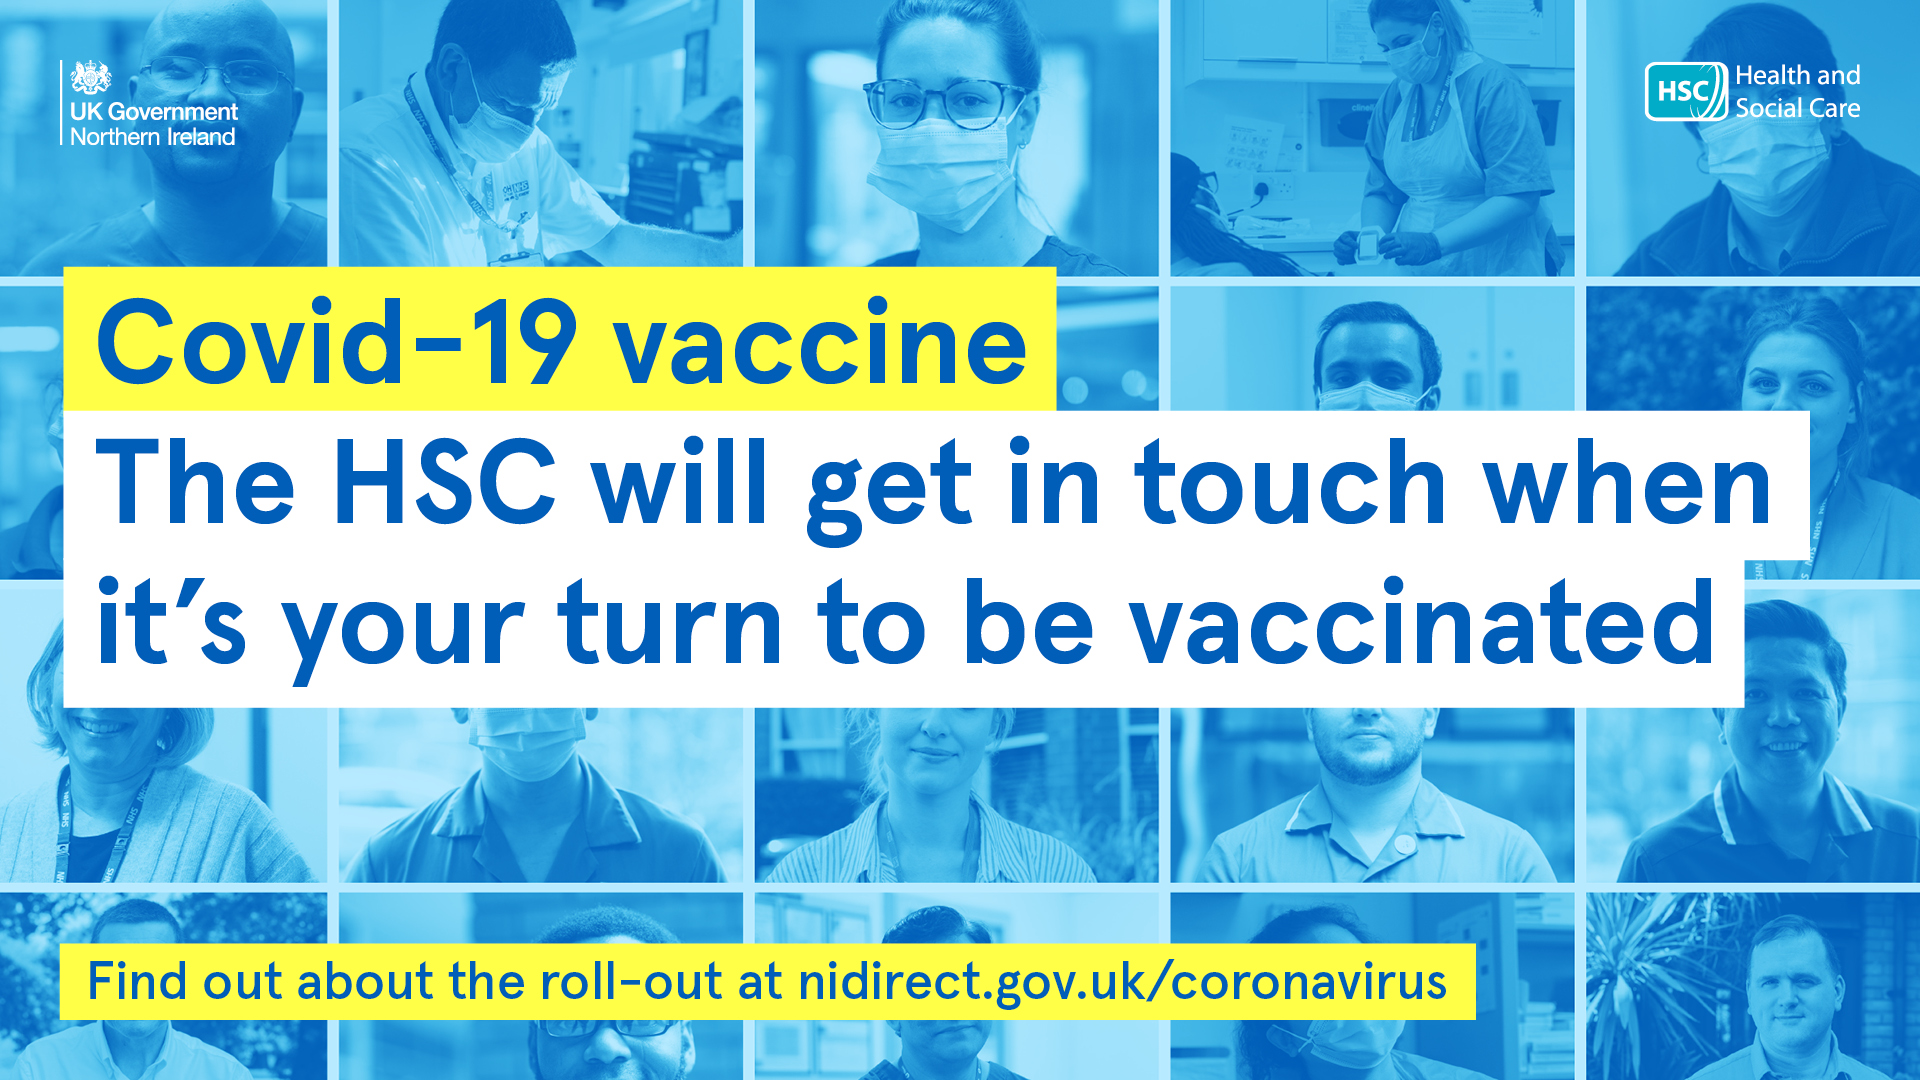 Covid-19 Vaccination Information Poster